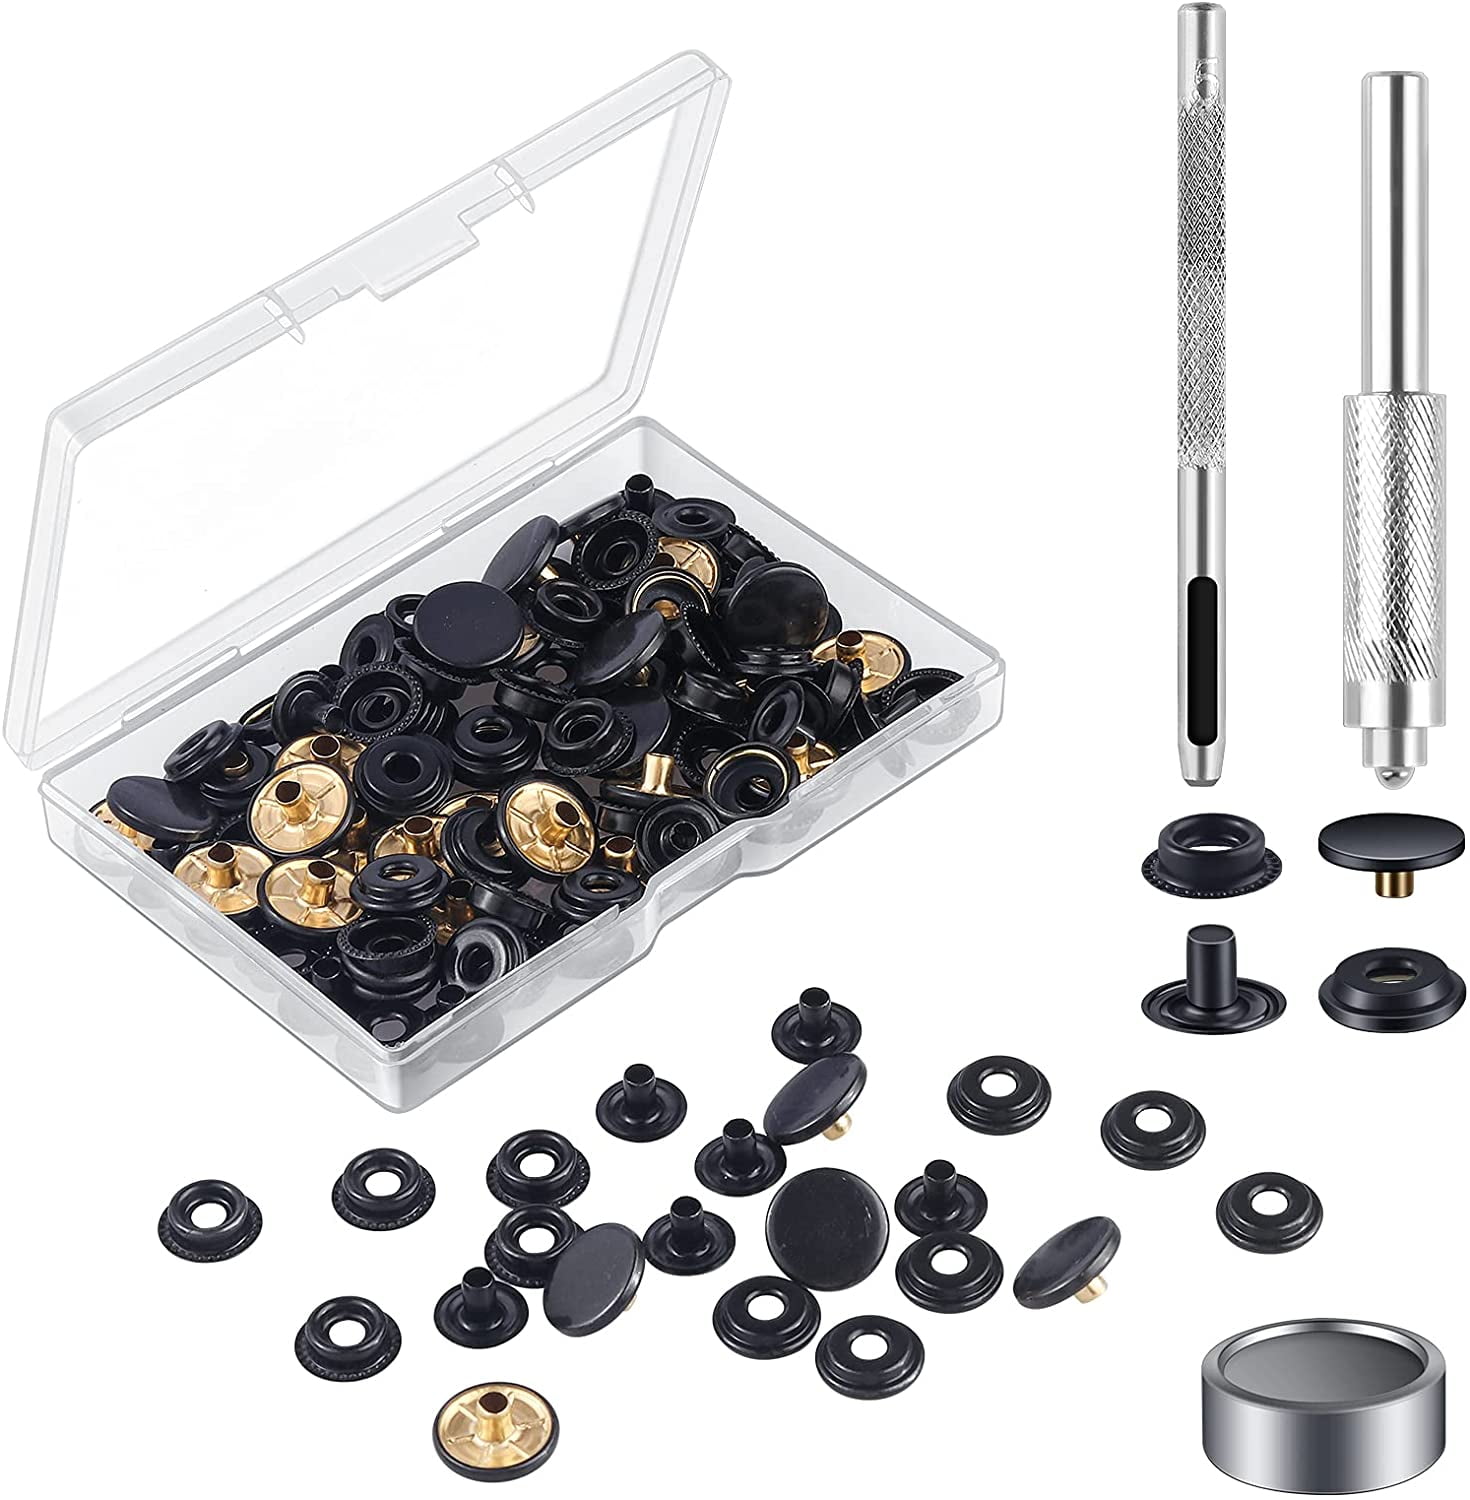 18 Sets Press Studs Cap Button, Stainless Steel Snap Fasteners Kit with  Hand Fixing Tools, Instant Metal Buttons No-Sew Clips Snap for Bags, Jeans,  Clothes, Fabric, Leather Craft(Black) 